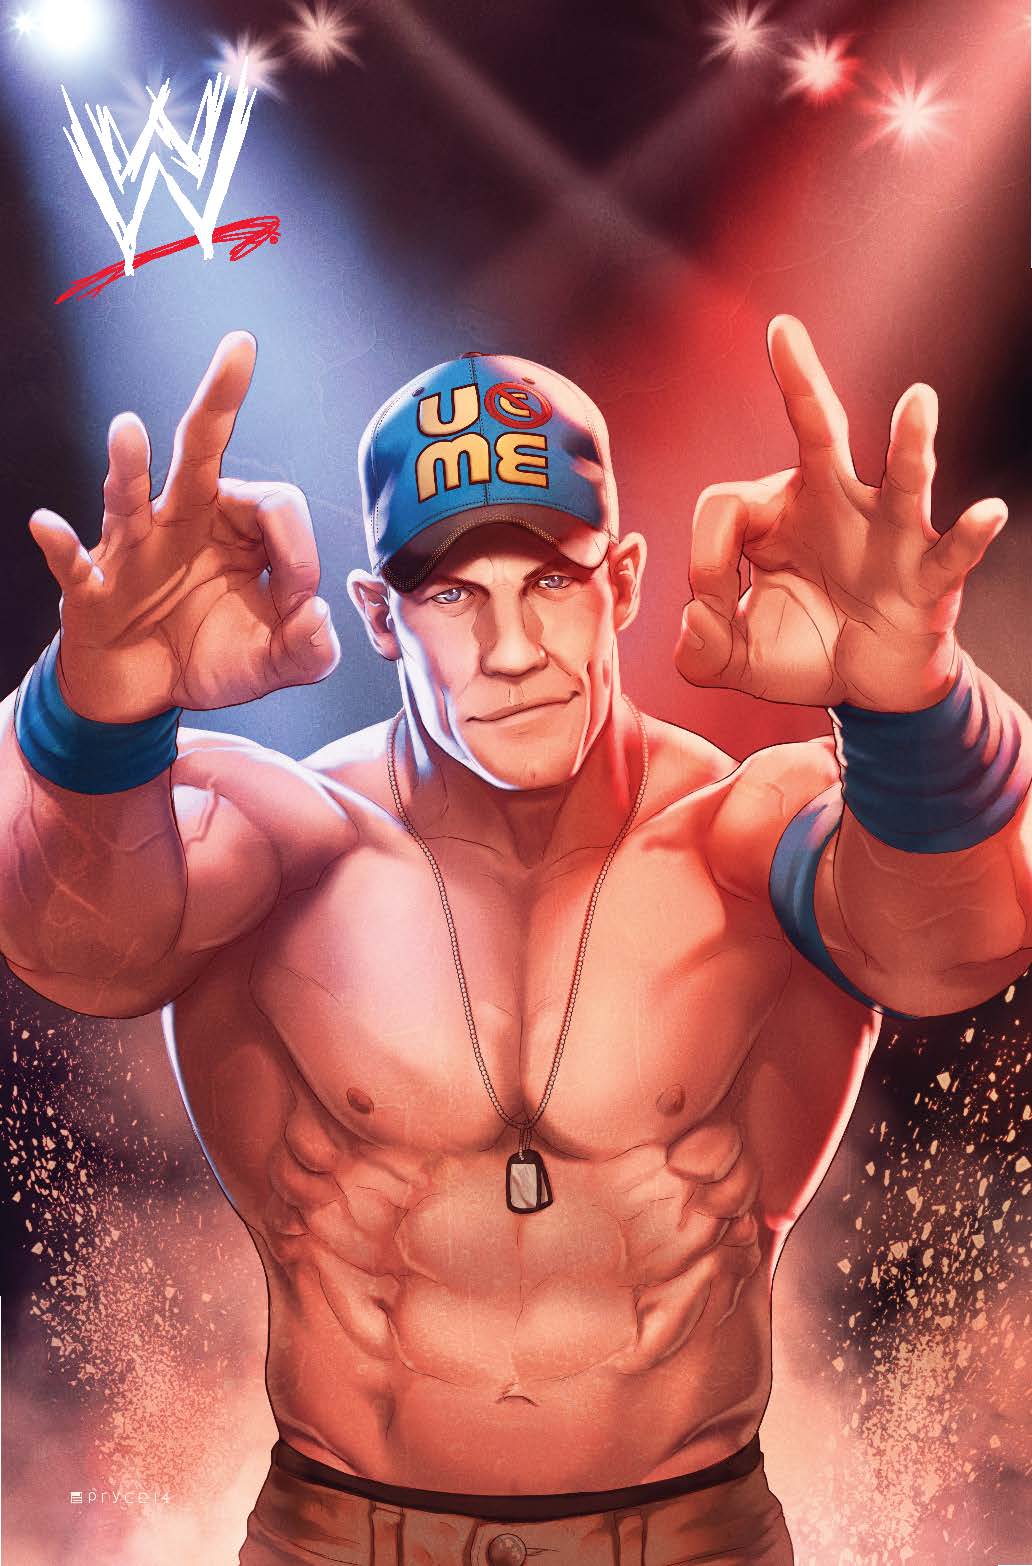 BOOM! Preview: WWE #5